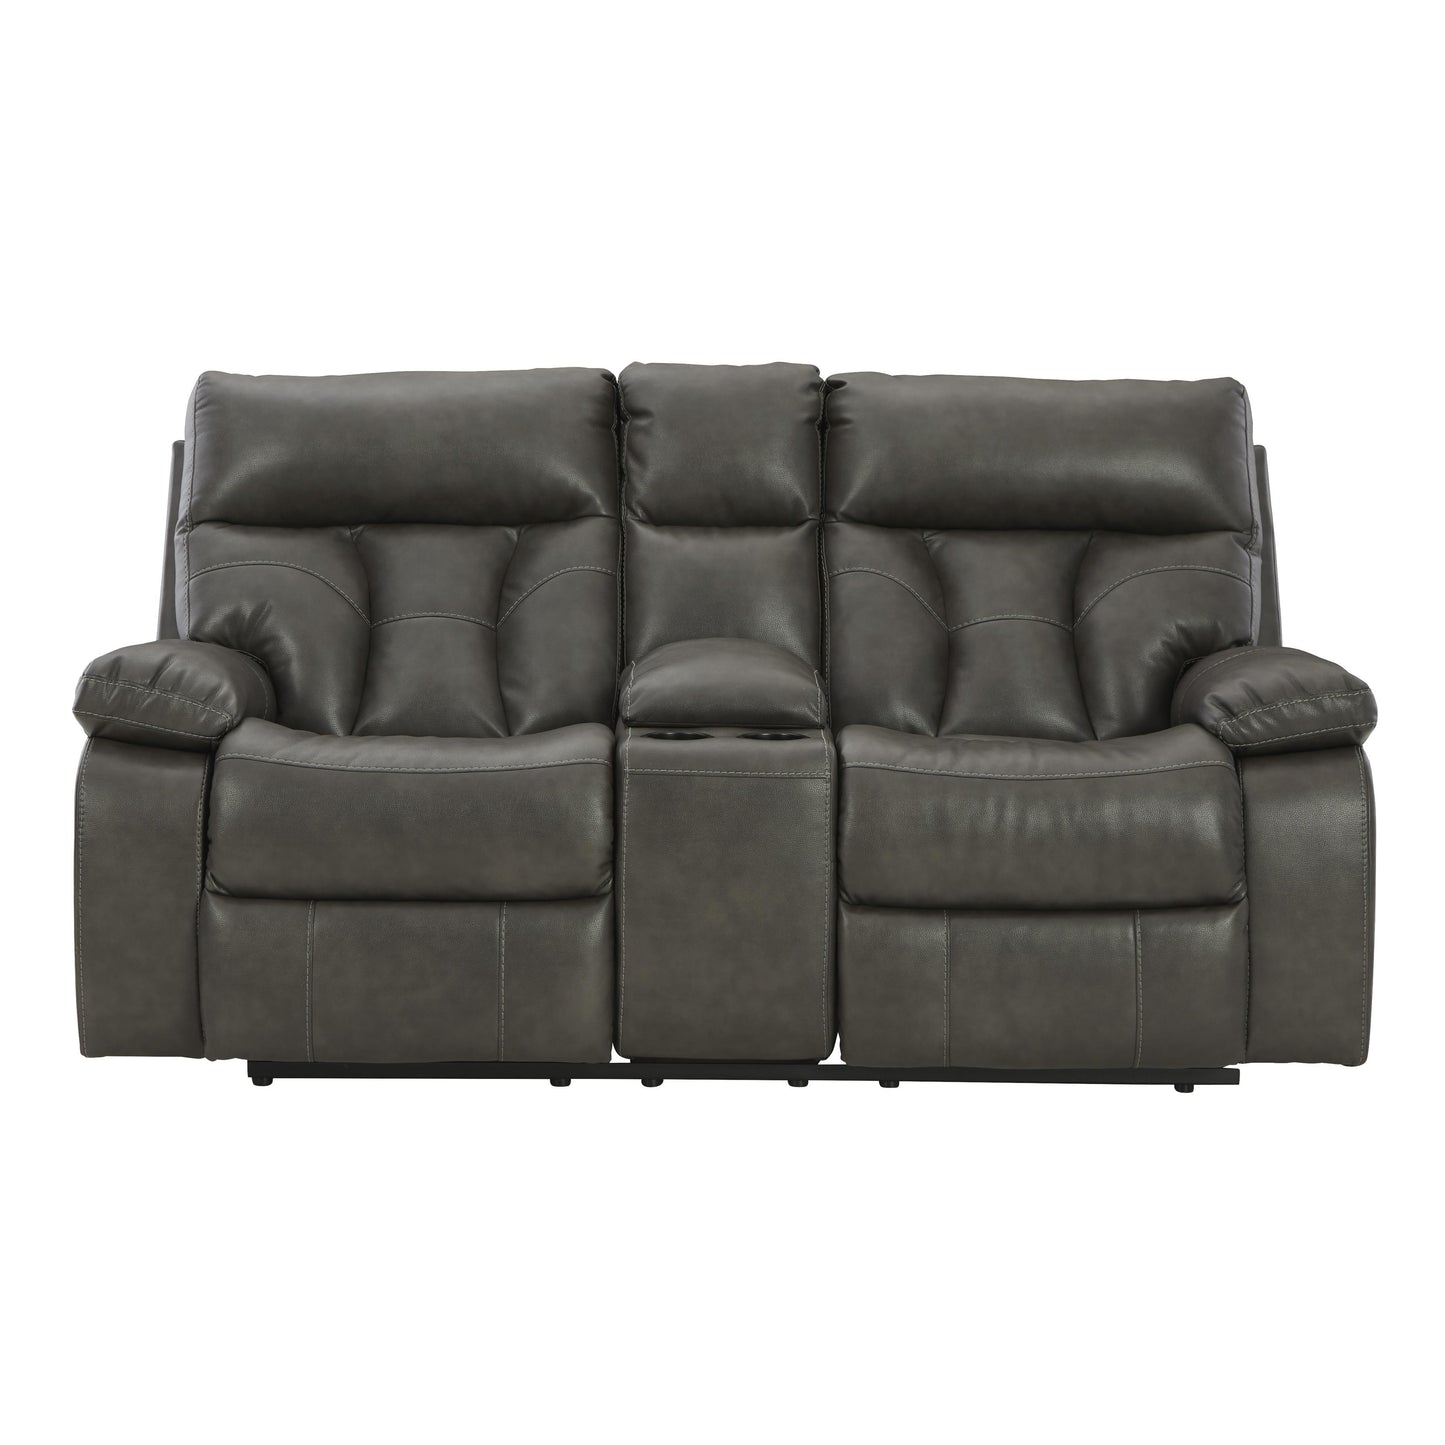 Signature Design by Ashley Willamen Power Reclining Leather Look Loveseat 1480194 IMAGE 2